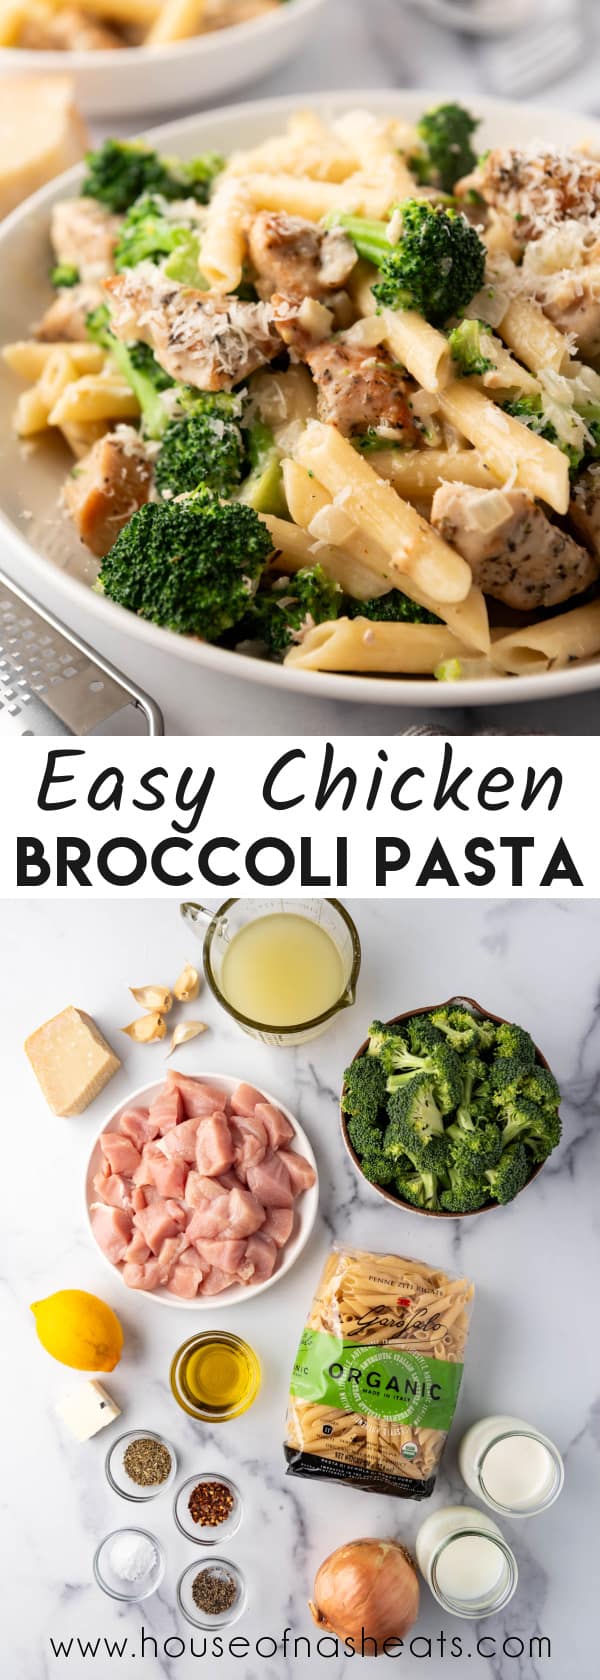 A collage of images of chicken broccoli pasta with text overlay.